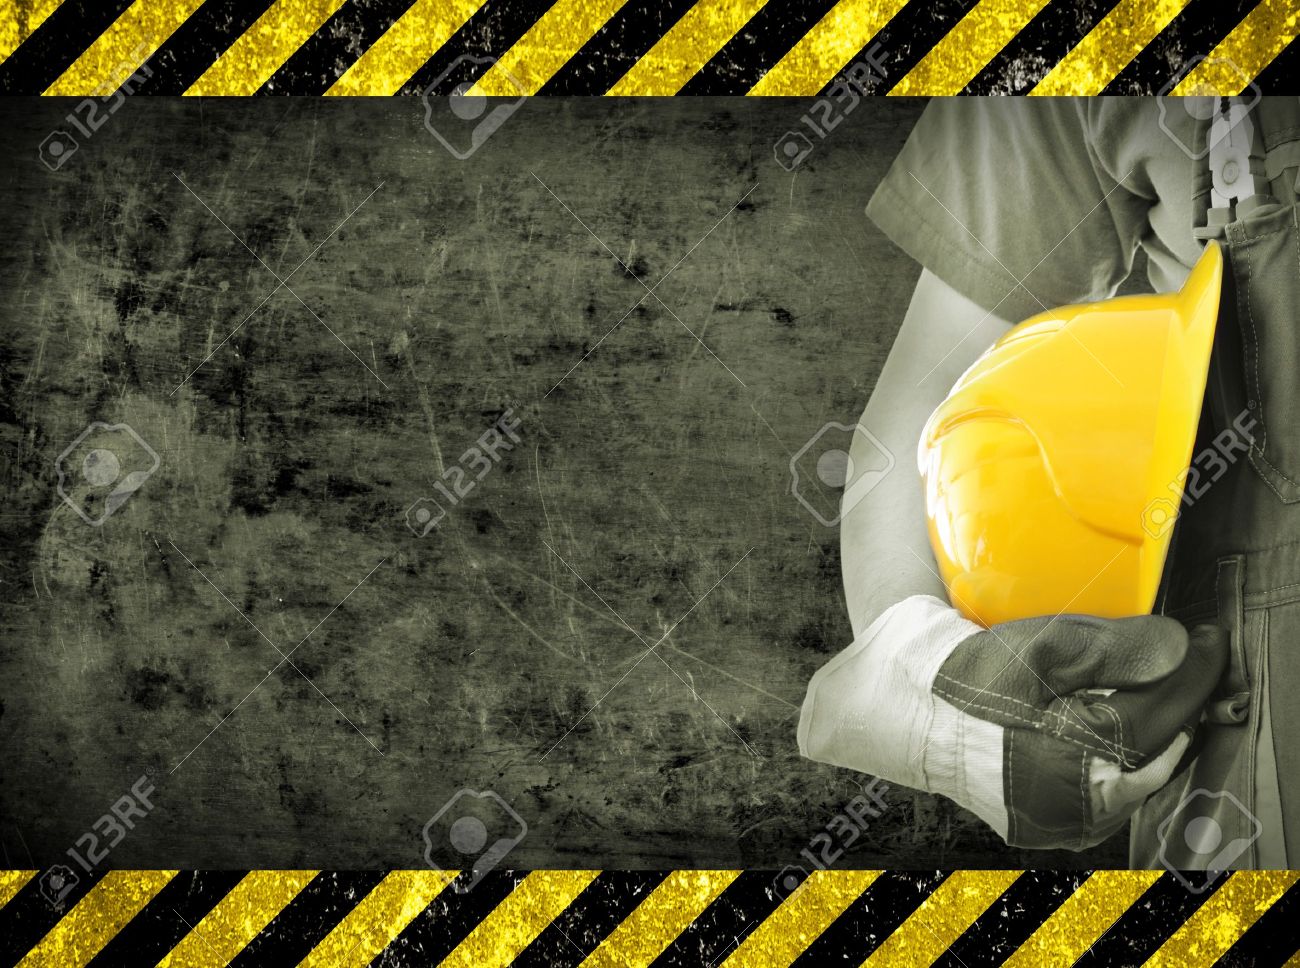 safety-background-images-7